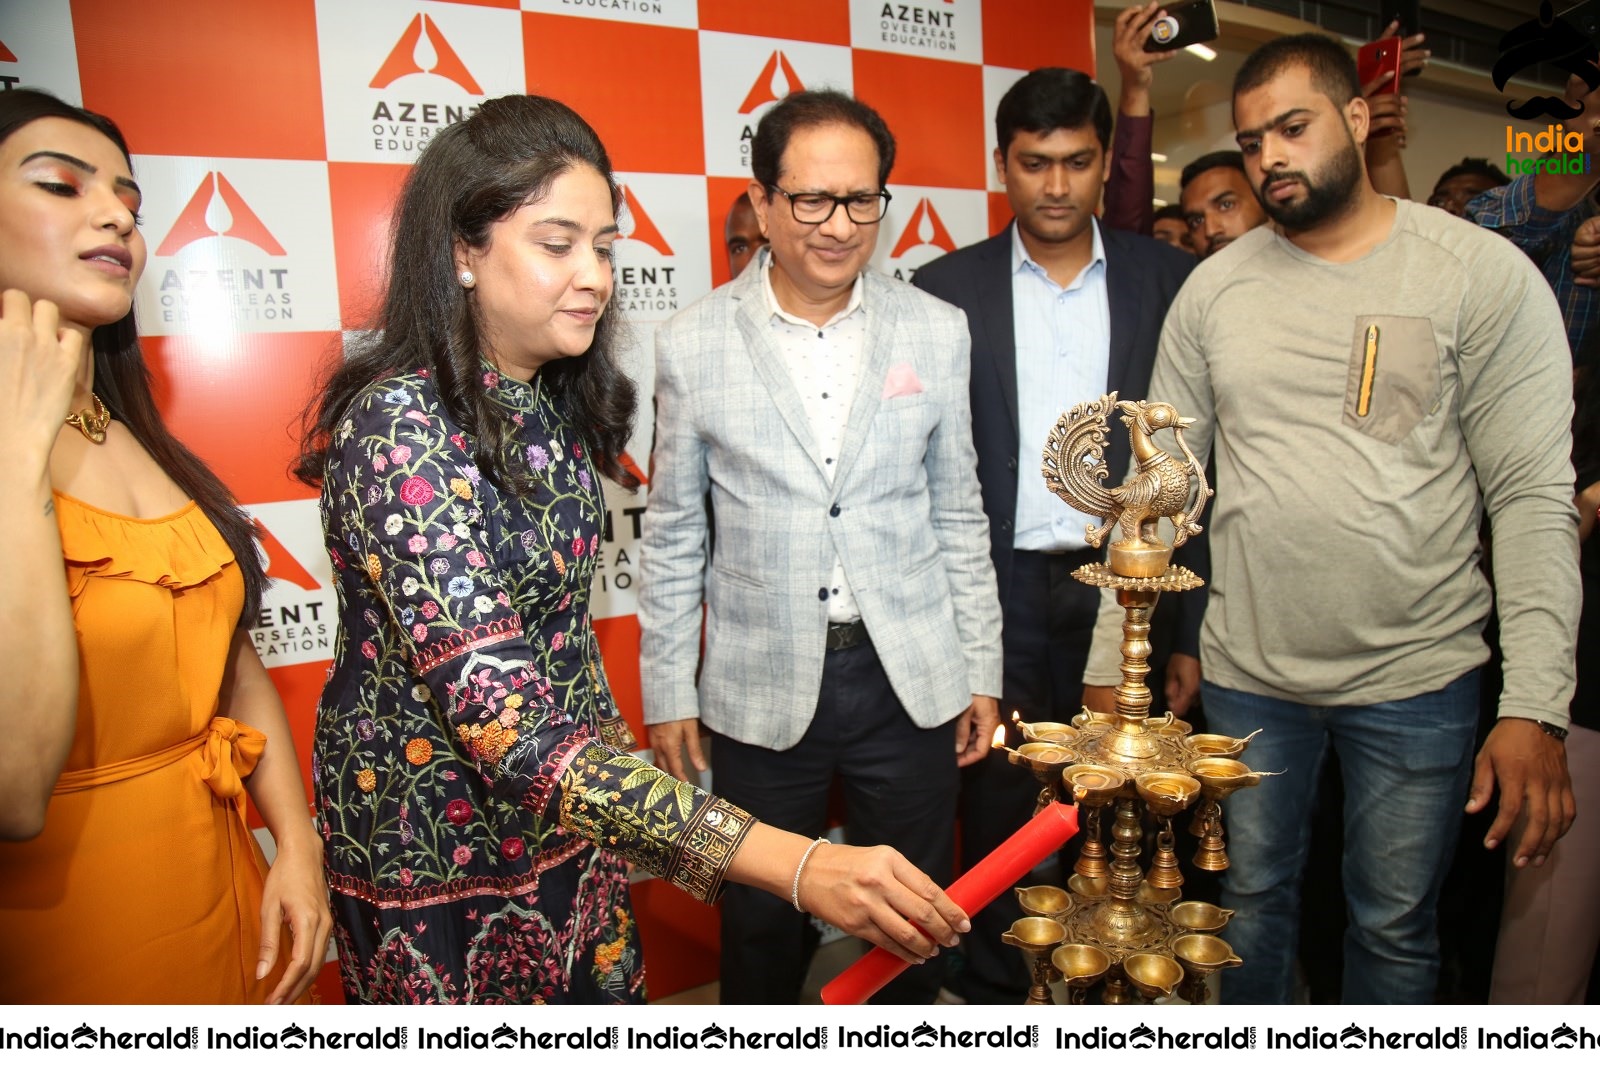 AZENT Overseas Educton Hyderbad Center Launch By Samantha Set 3